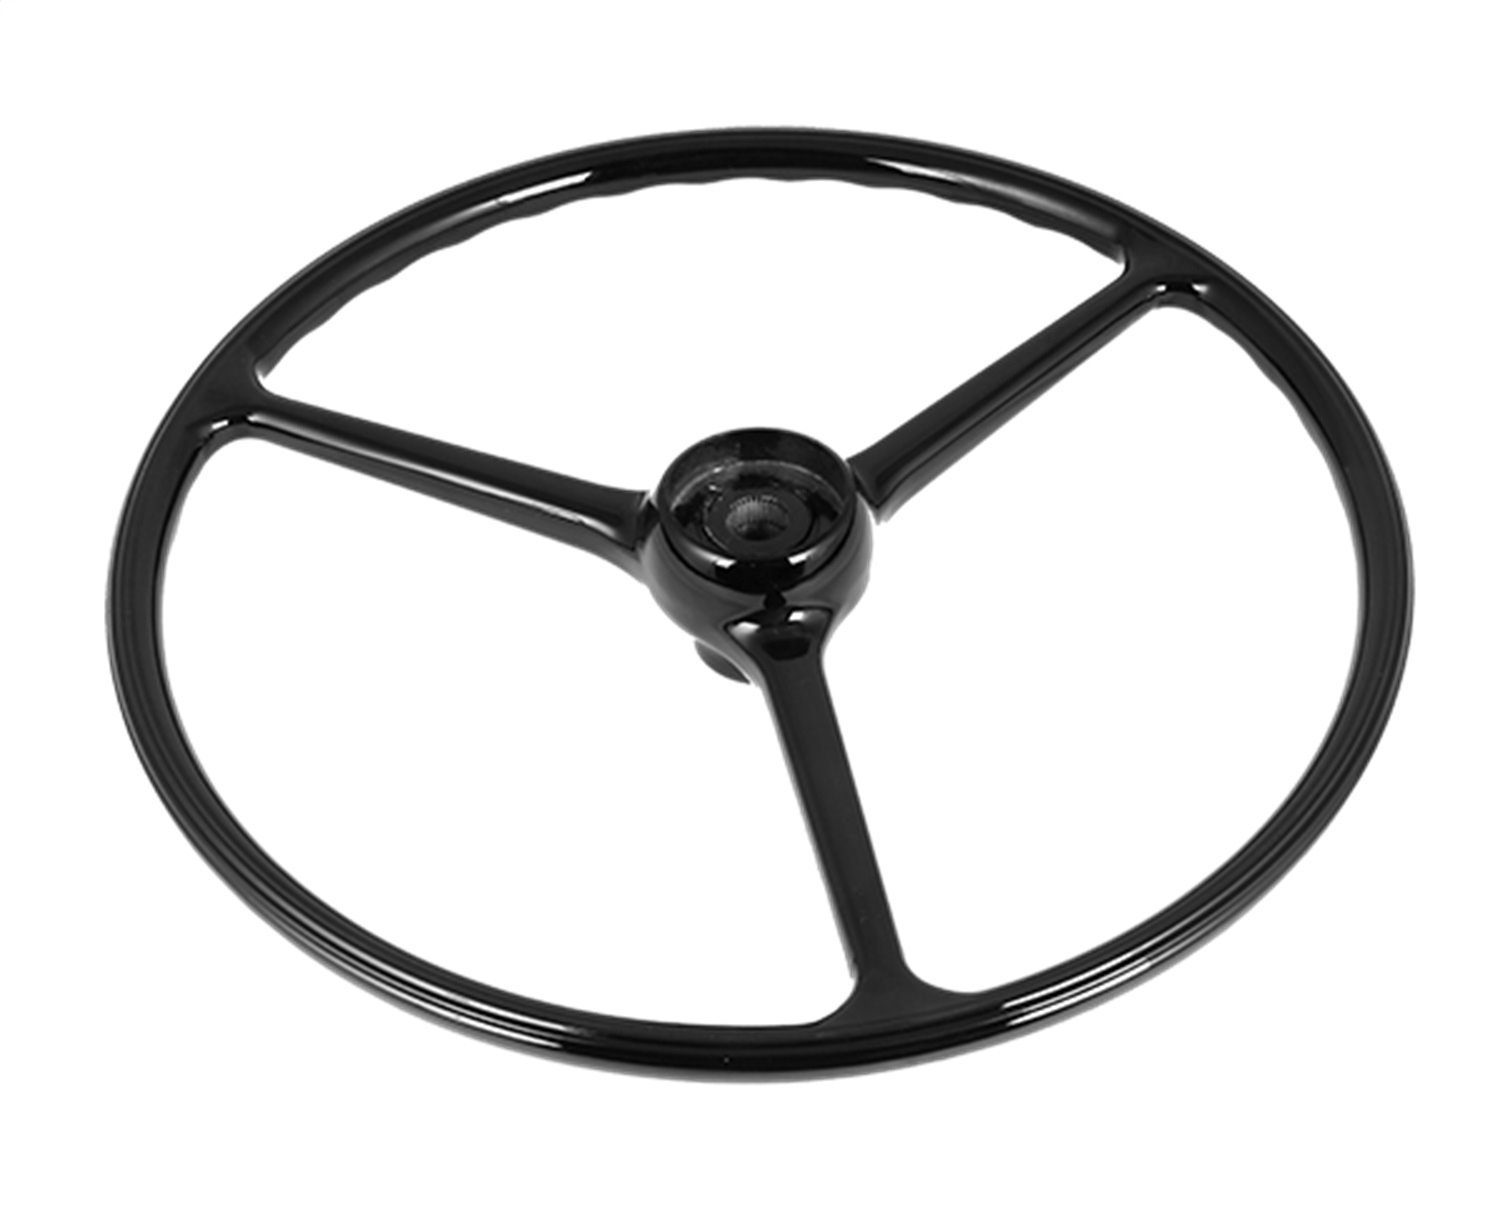 This black steering wheel from Omix-ADA fits 64-75